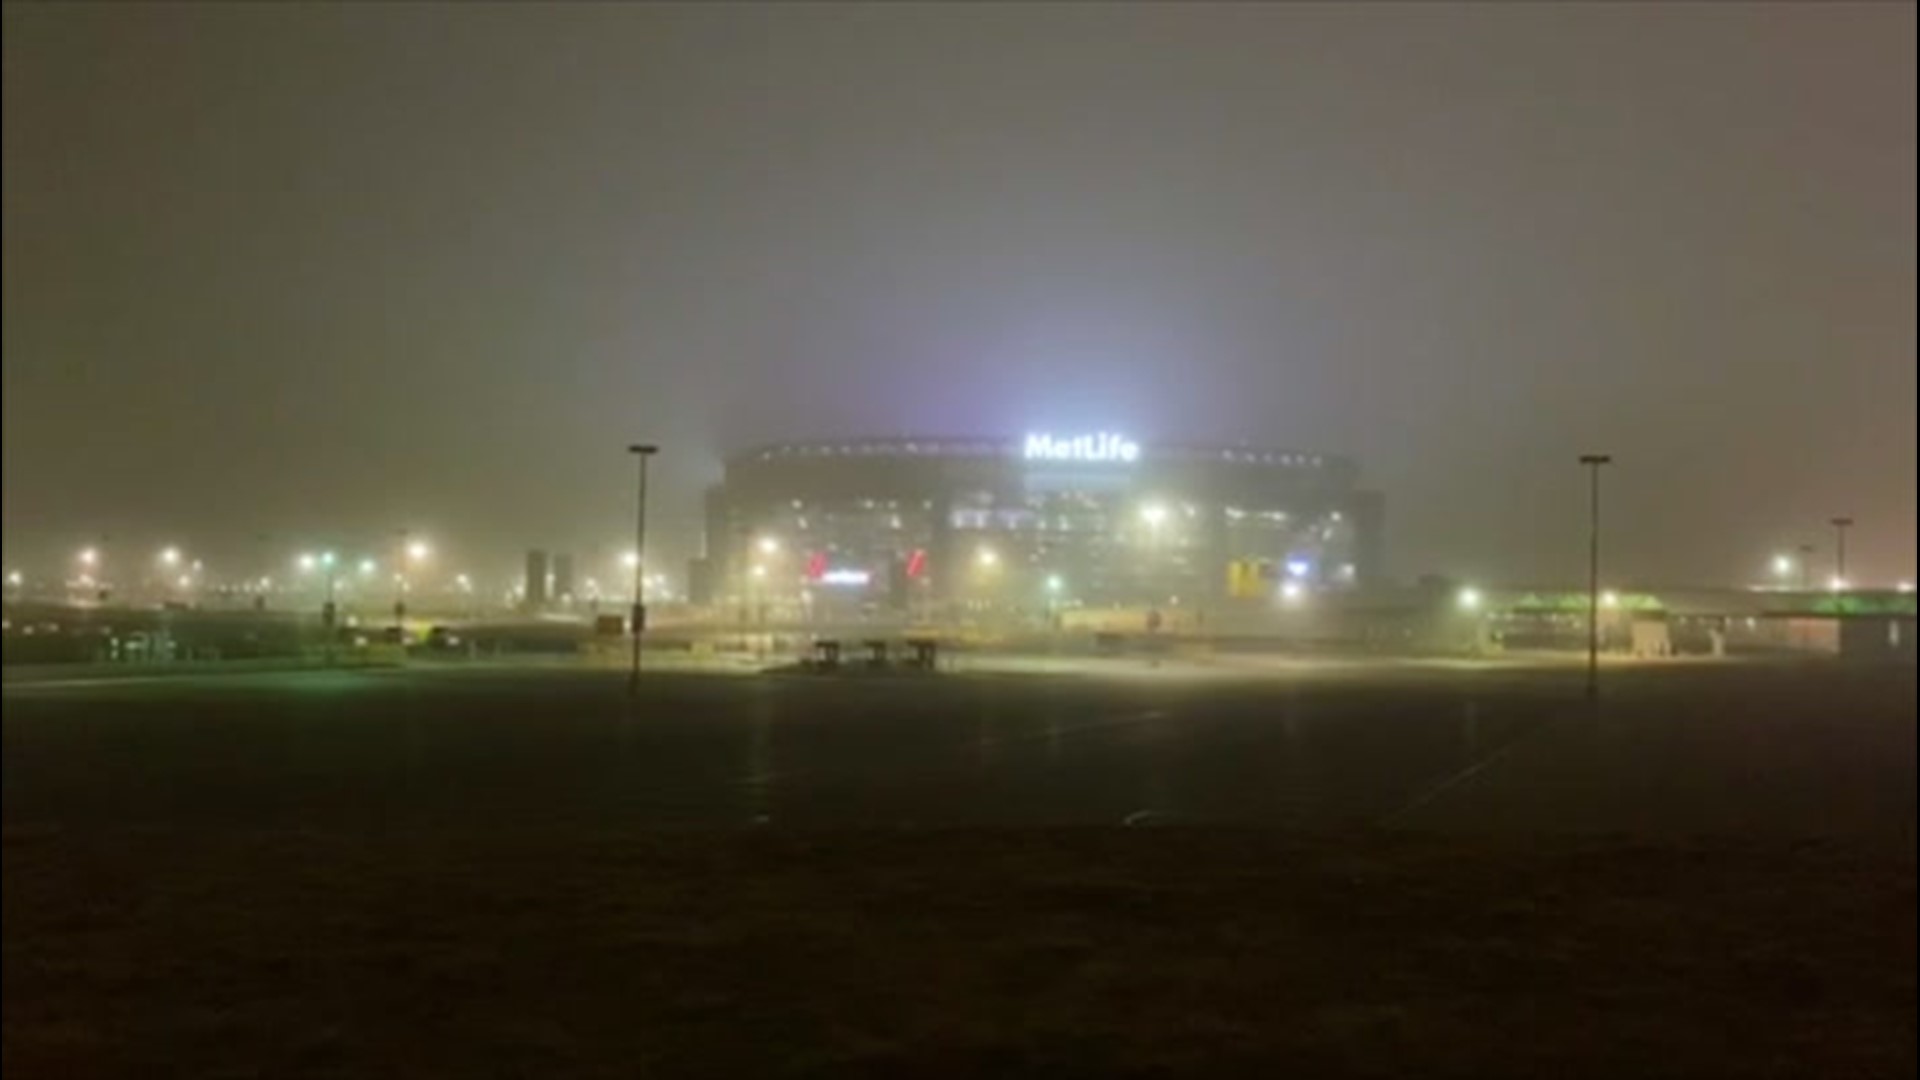 The night of Feb. 18, fog shrouded MetLife Stadium in East Rutherford, New Jersey.